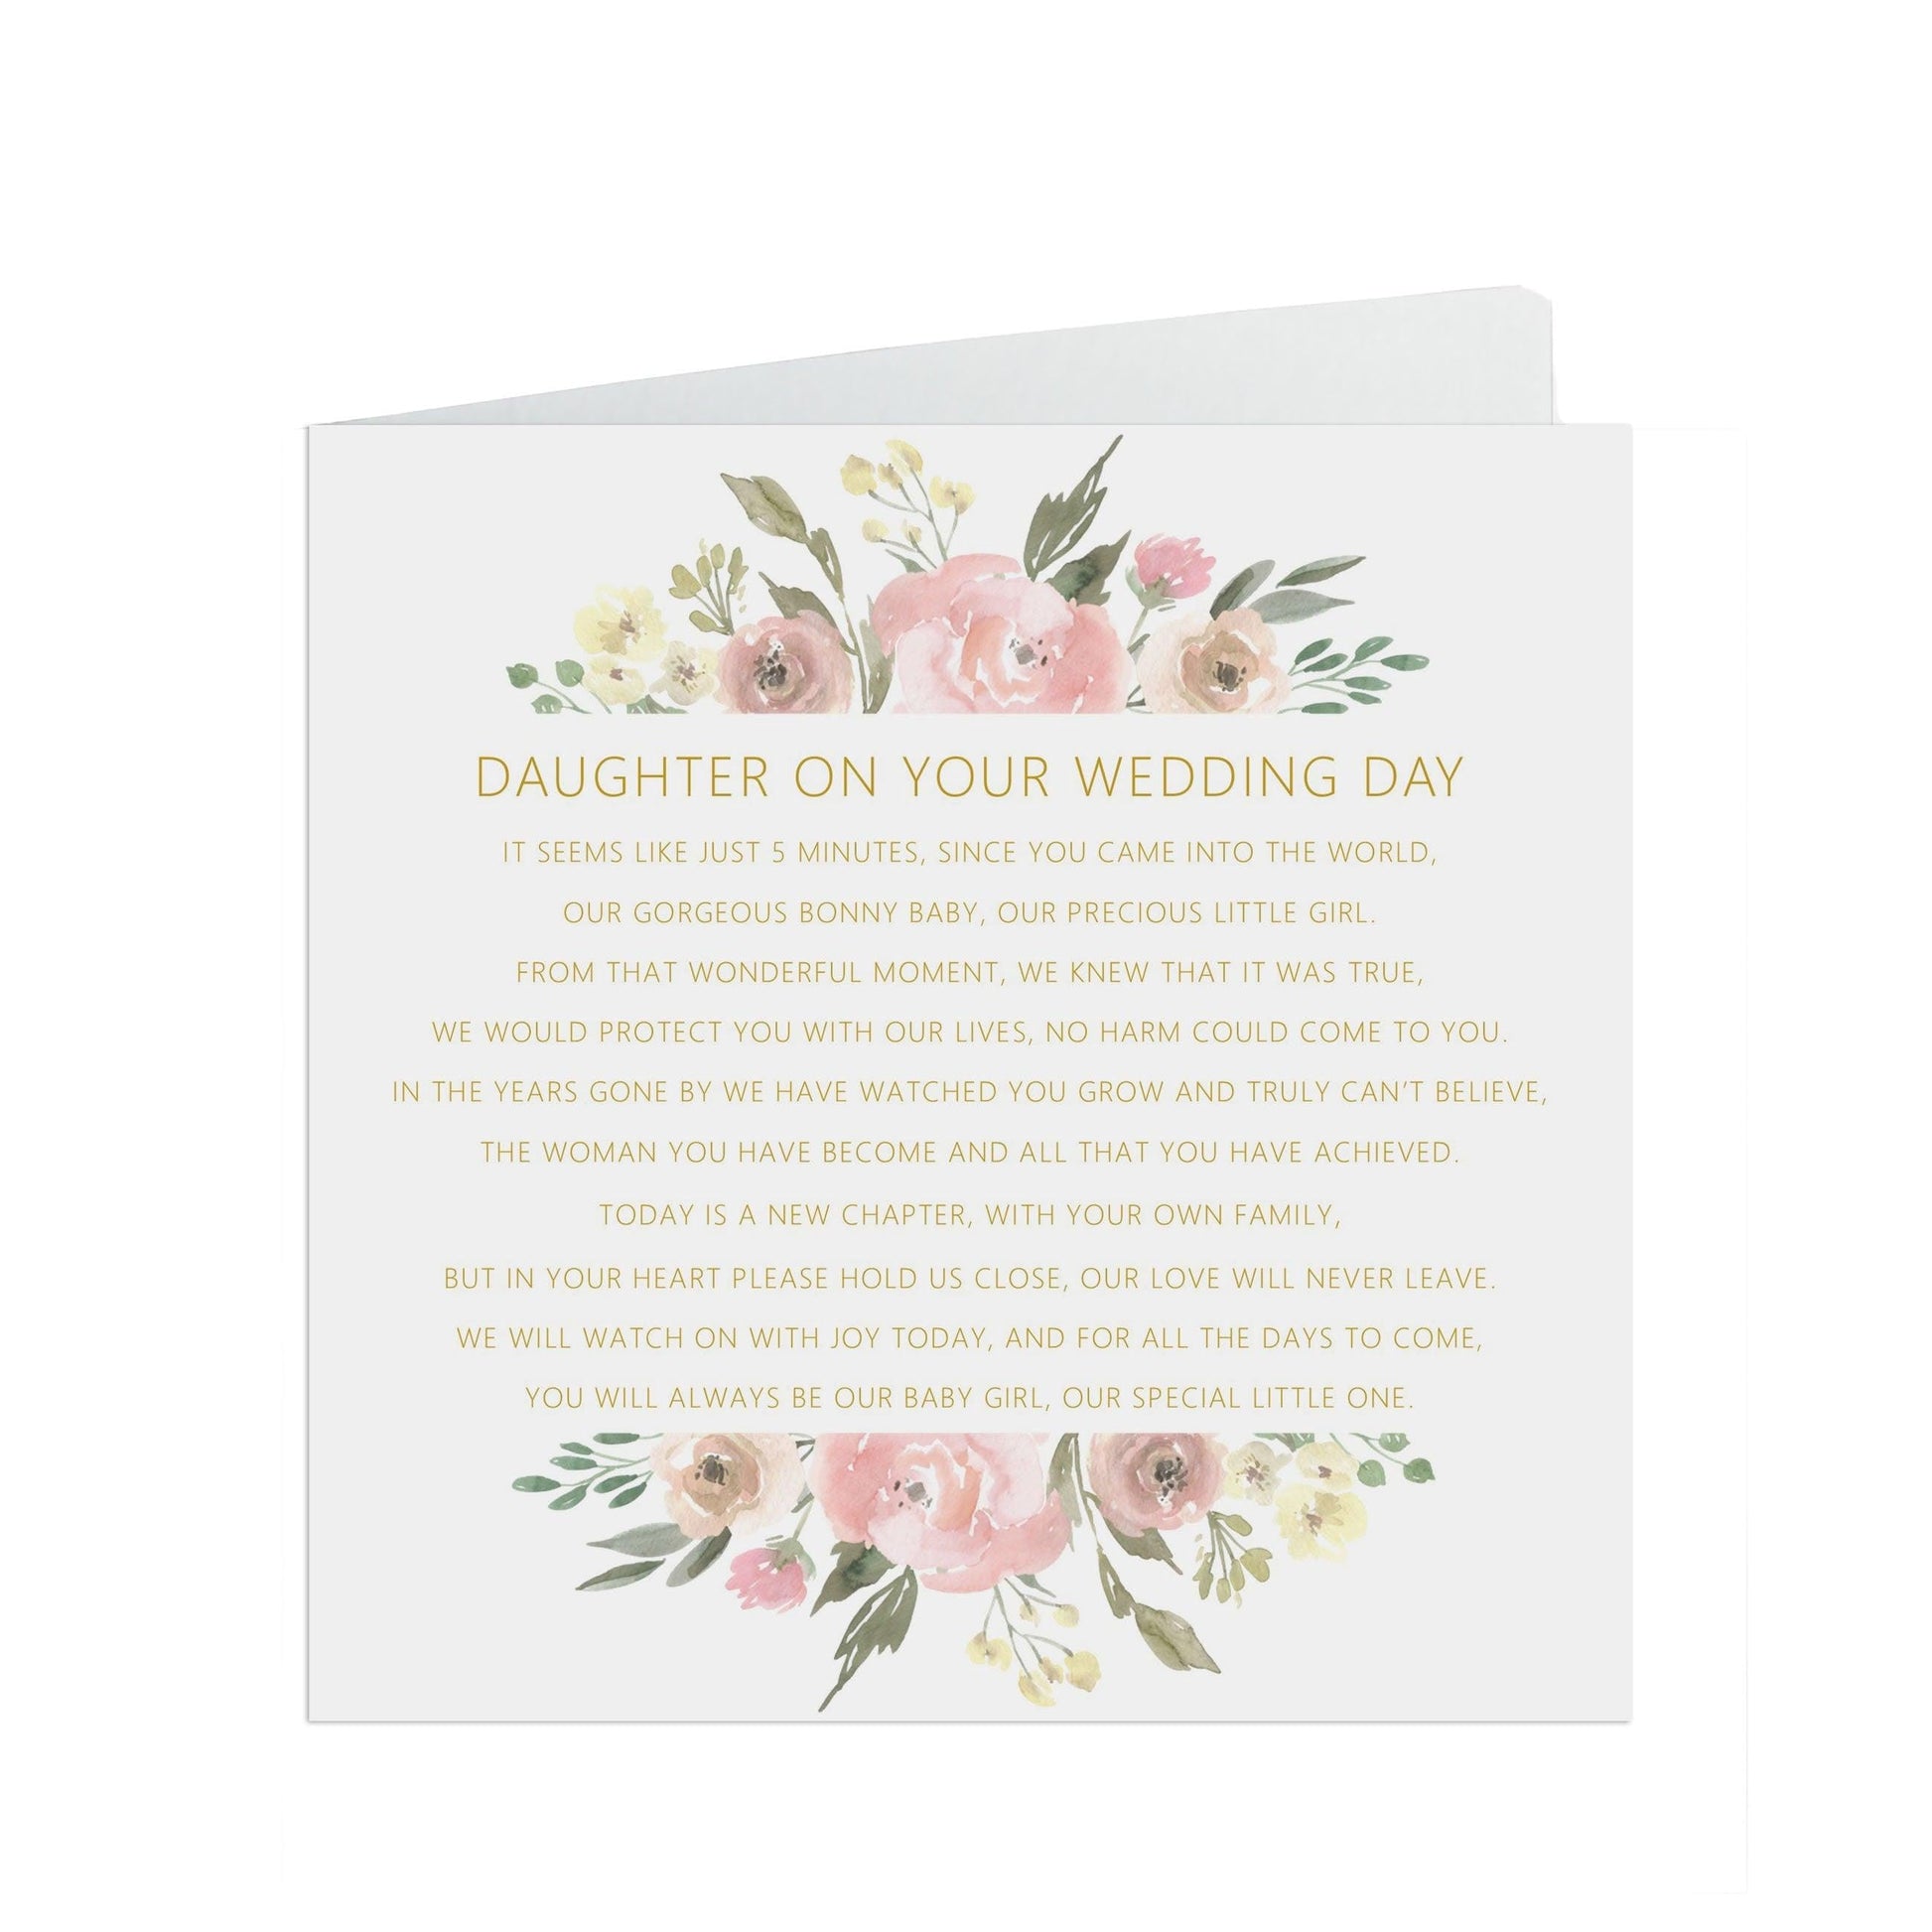  Daughter On Your Wedding Day Card, Blush Floral 6x6 Inches With A White Envelope by PMPRINTED 